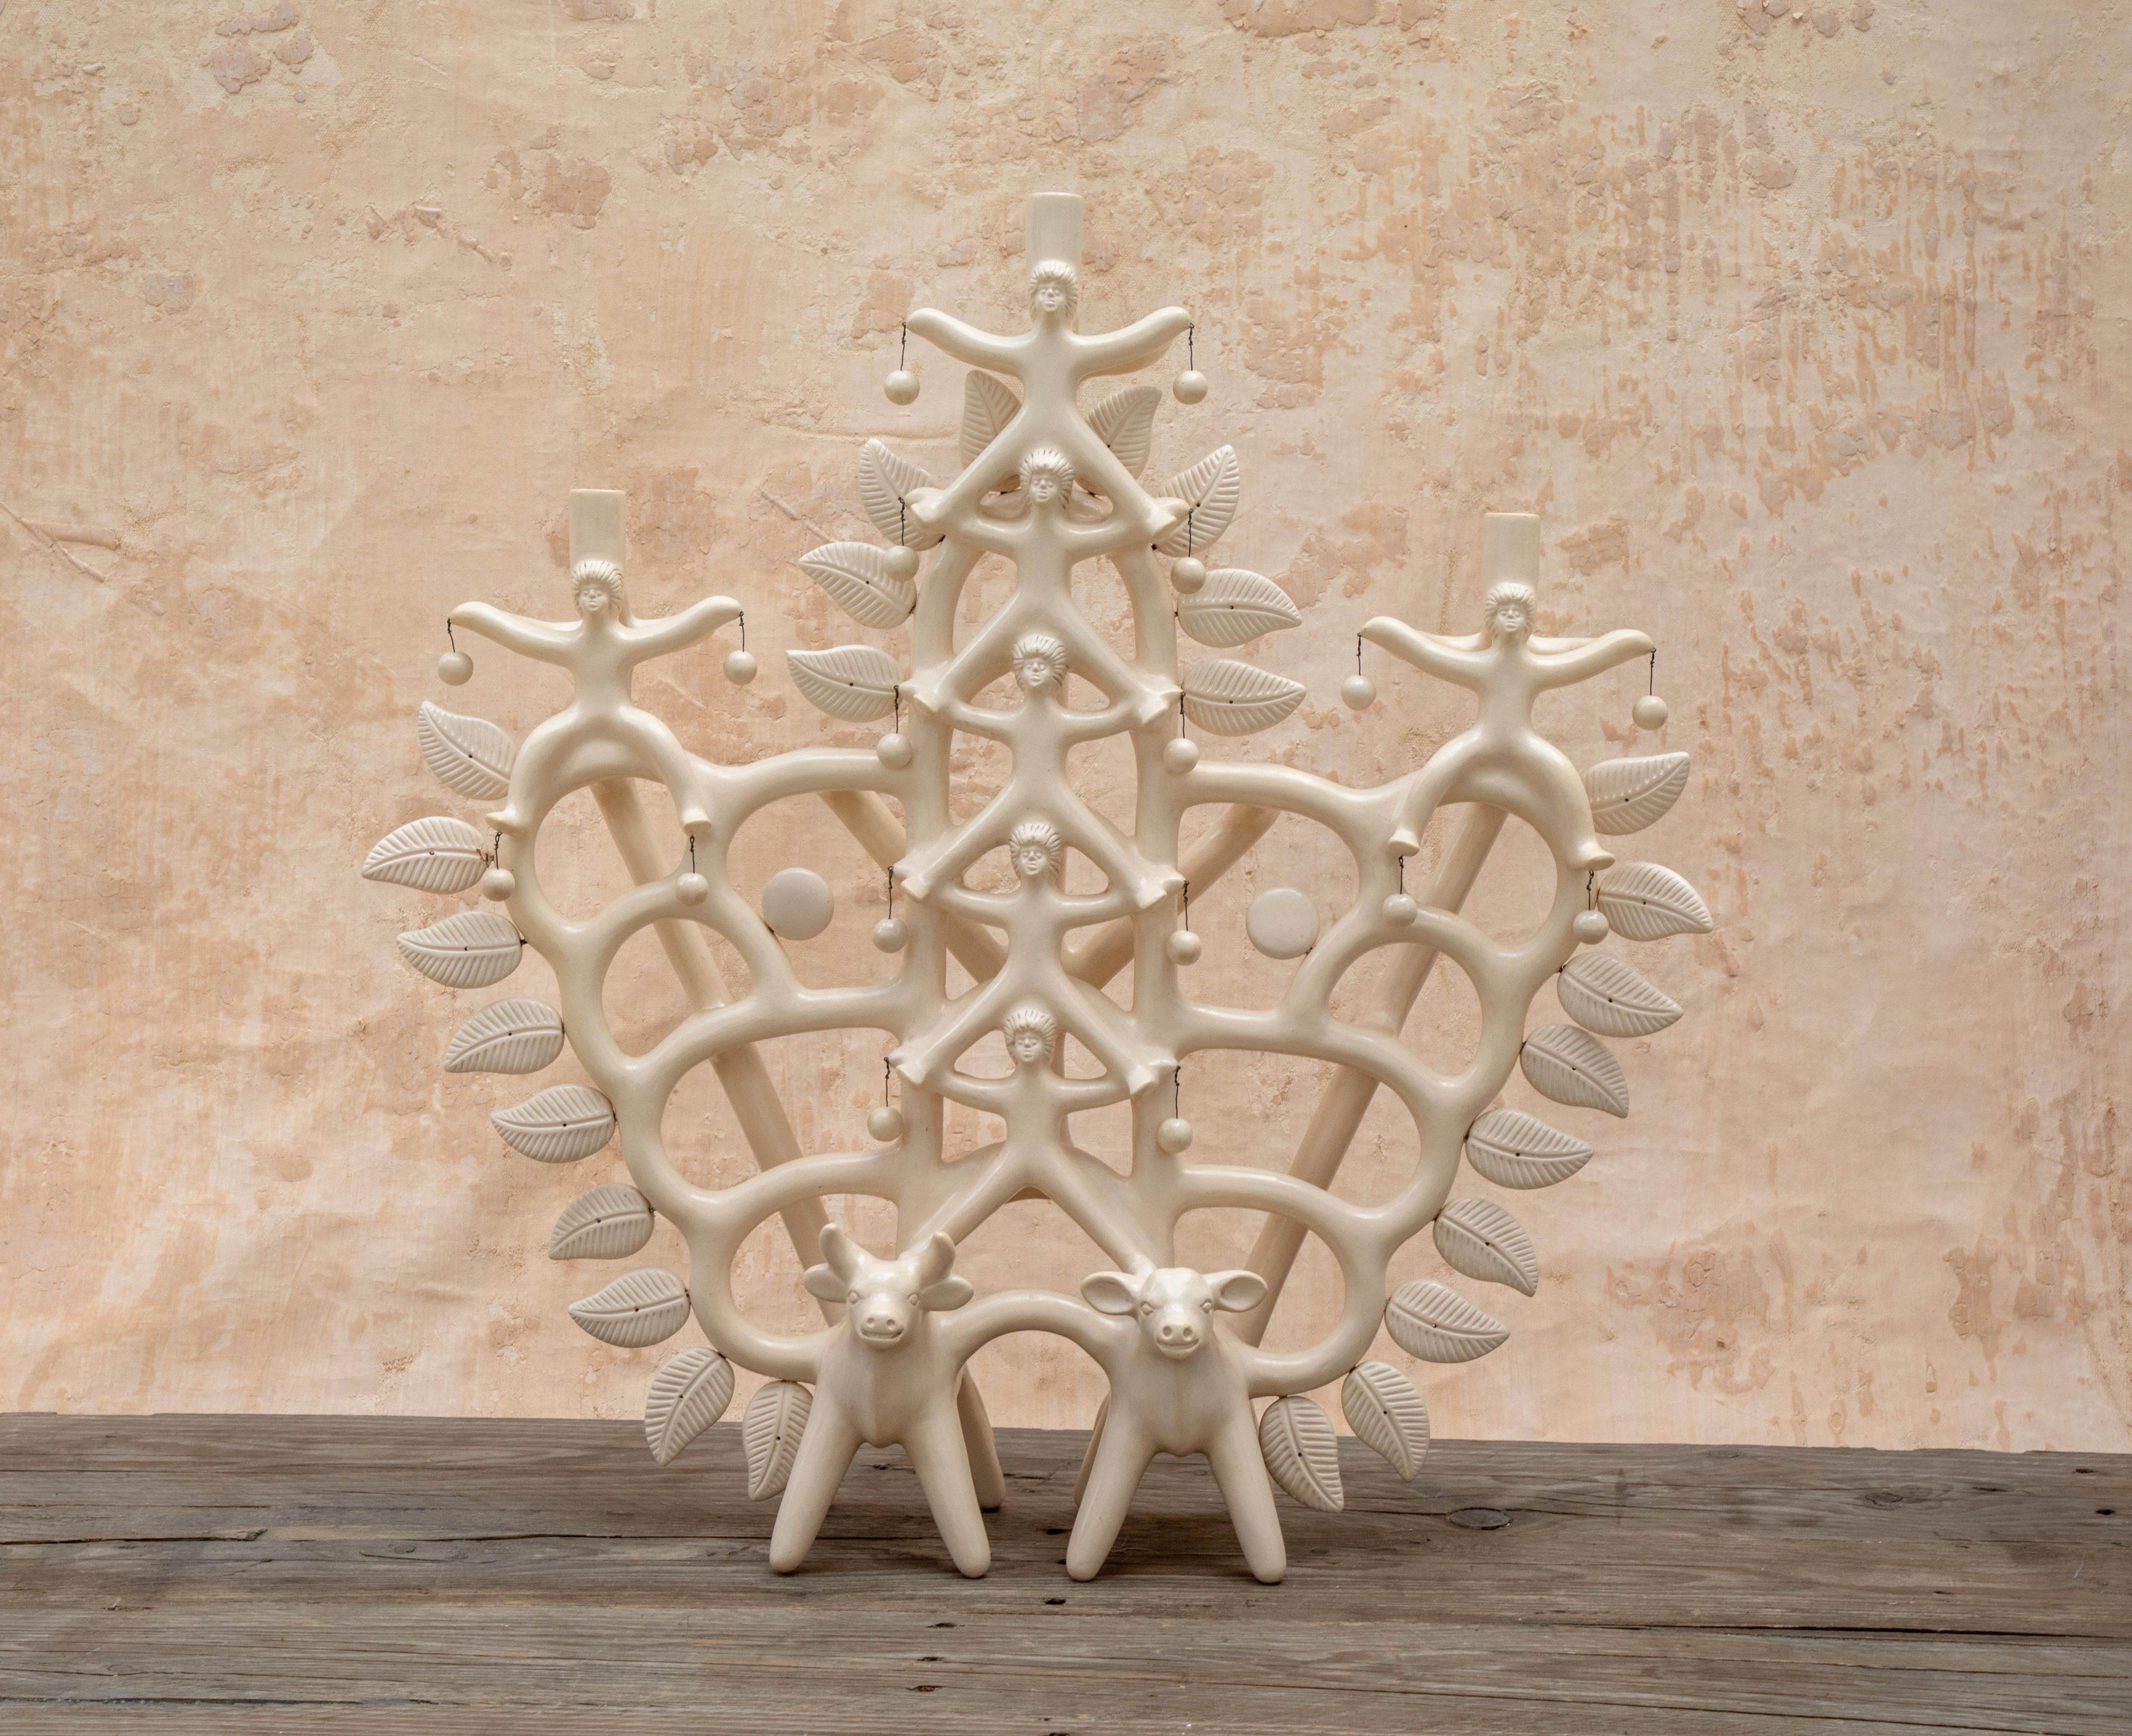 Arbol Acatlán Cirquero candleholder by Onora
Dimensions: W 60 x D 15 x H 73 cm
Materials: Clay, Quartz stone

Hand-sculpted clay, covered with a mineral-based slip and burnished using a quartz stone. The “Circo Collection” is a reproduction of Herón